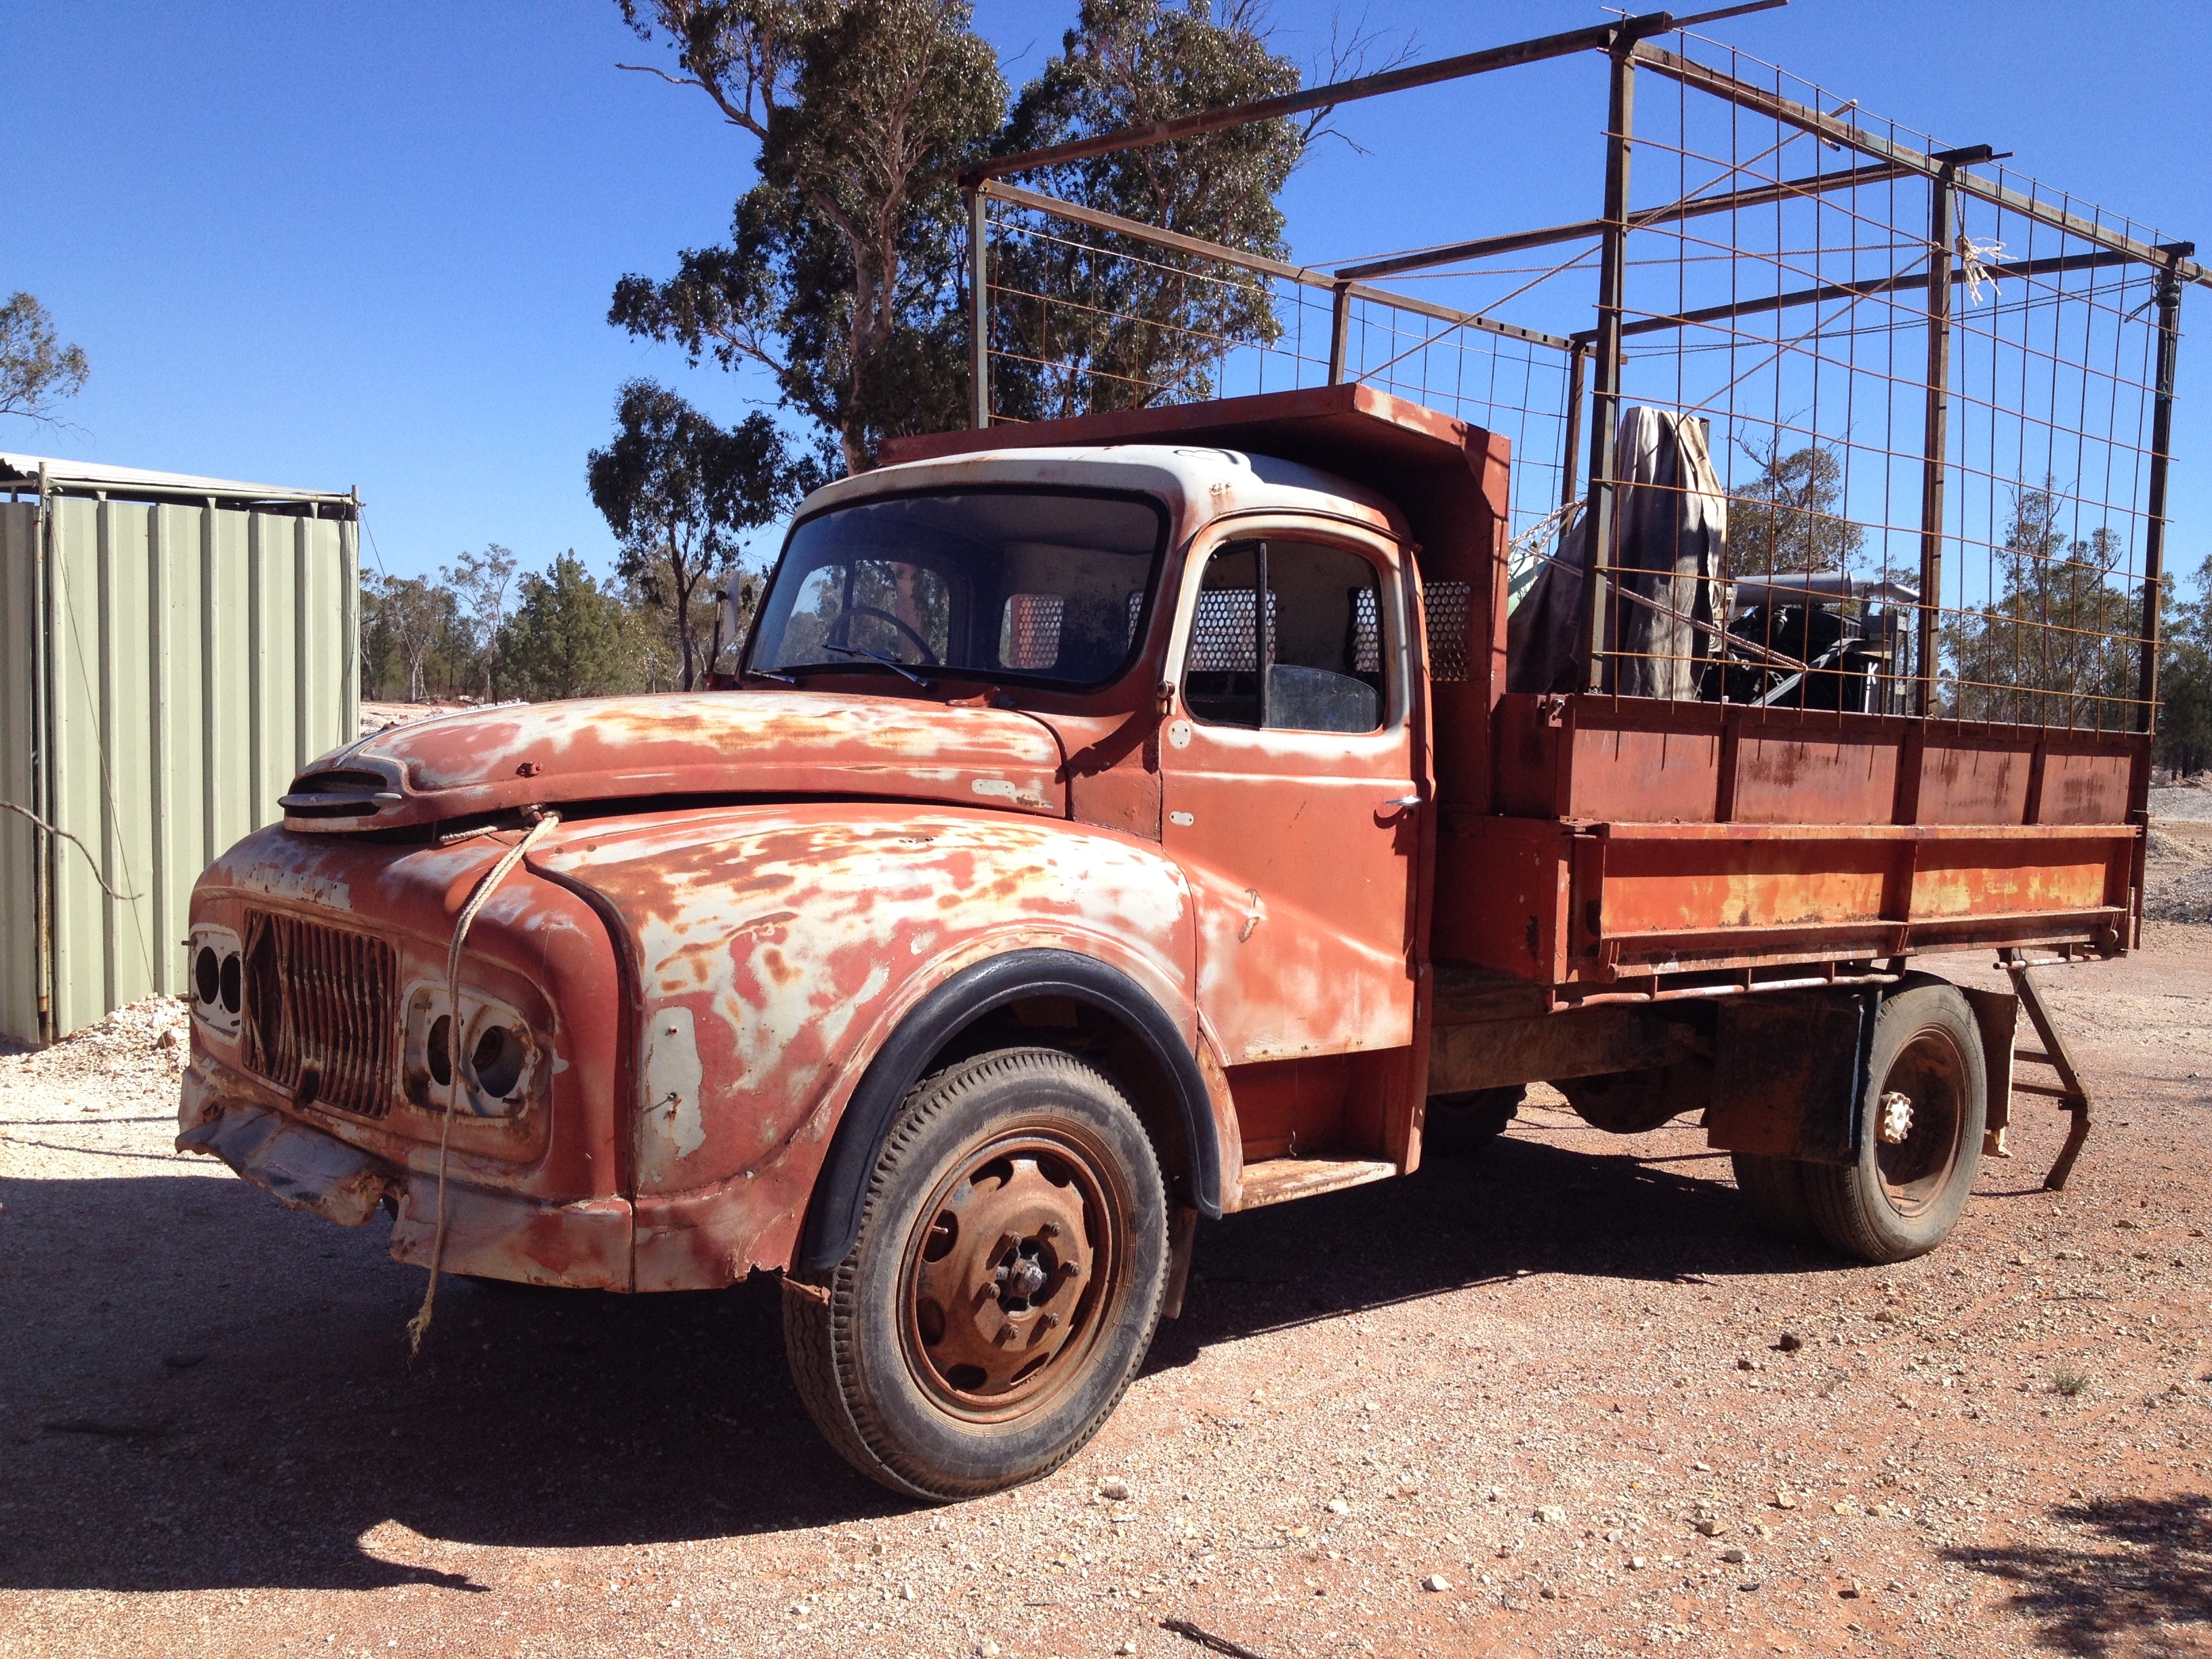 Old Truck used regularly